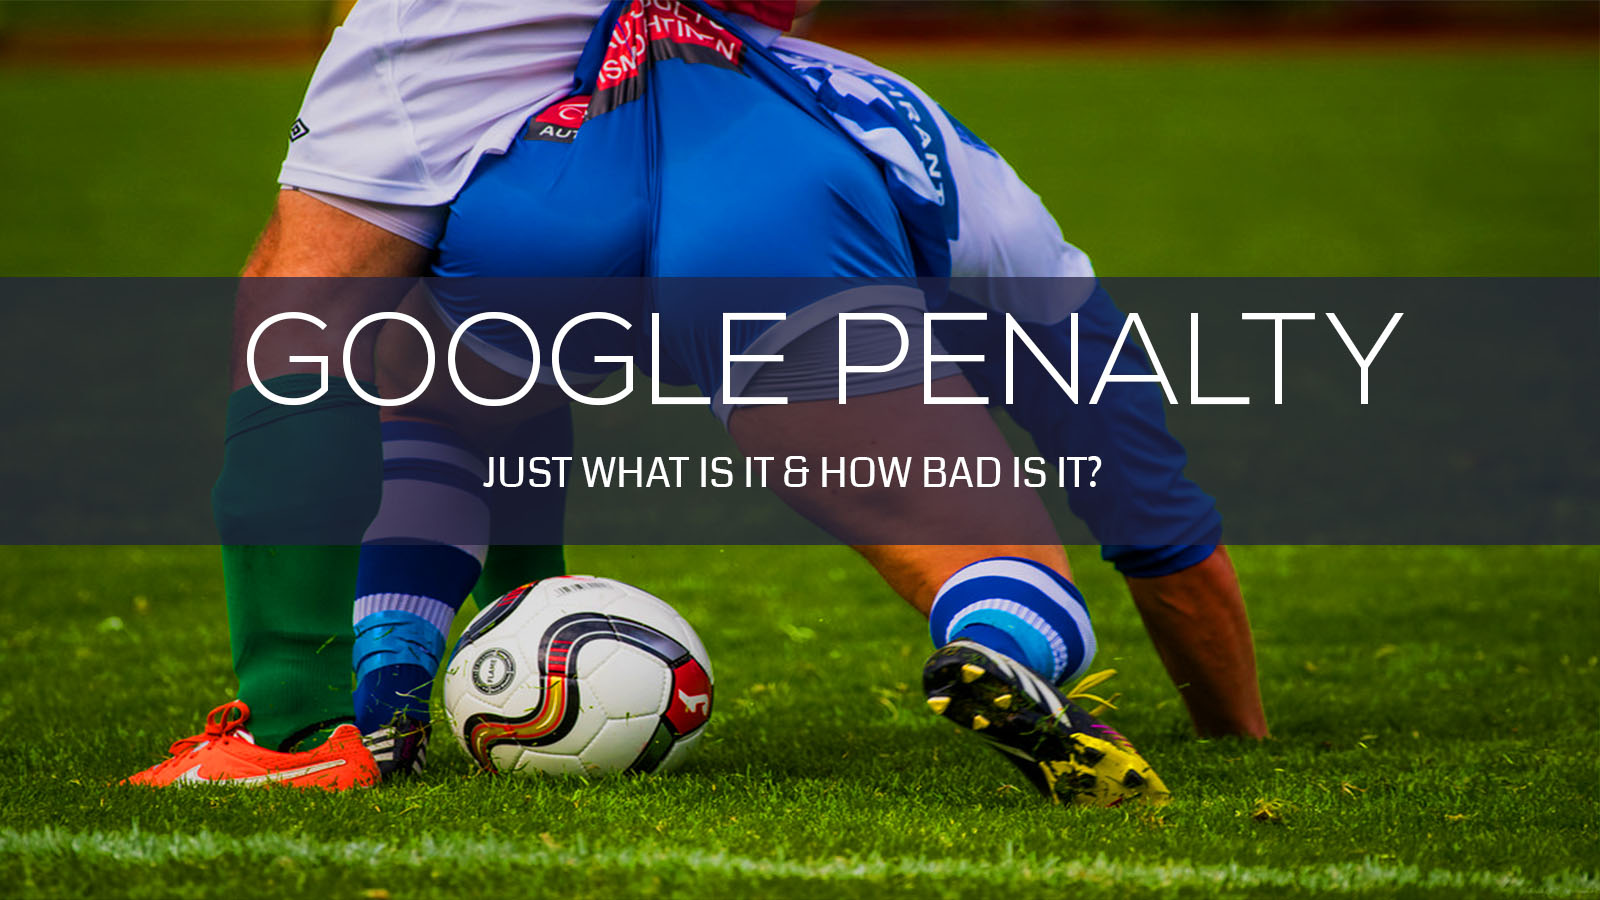 What Is A Google Penalty?